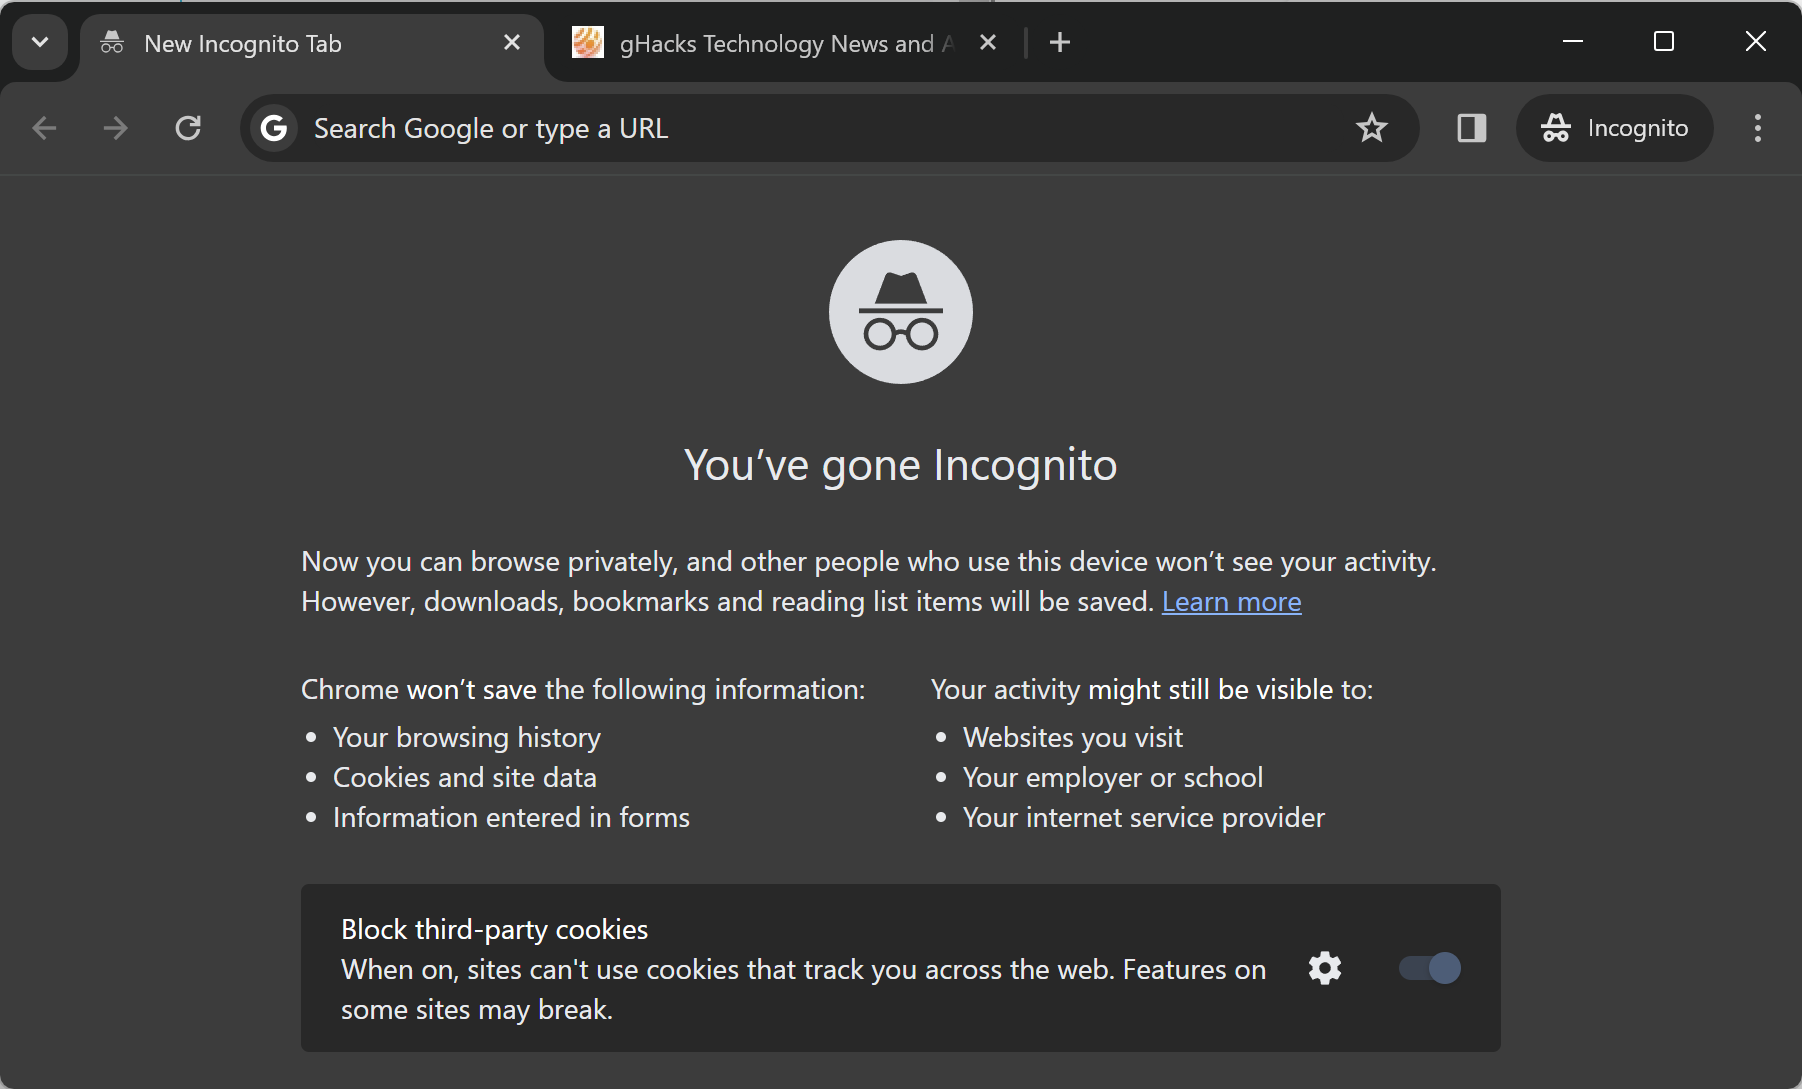 Is Your Browser Really Private? Google's Latest Incognito Mode Update Sparks Debate